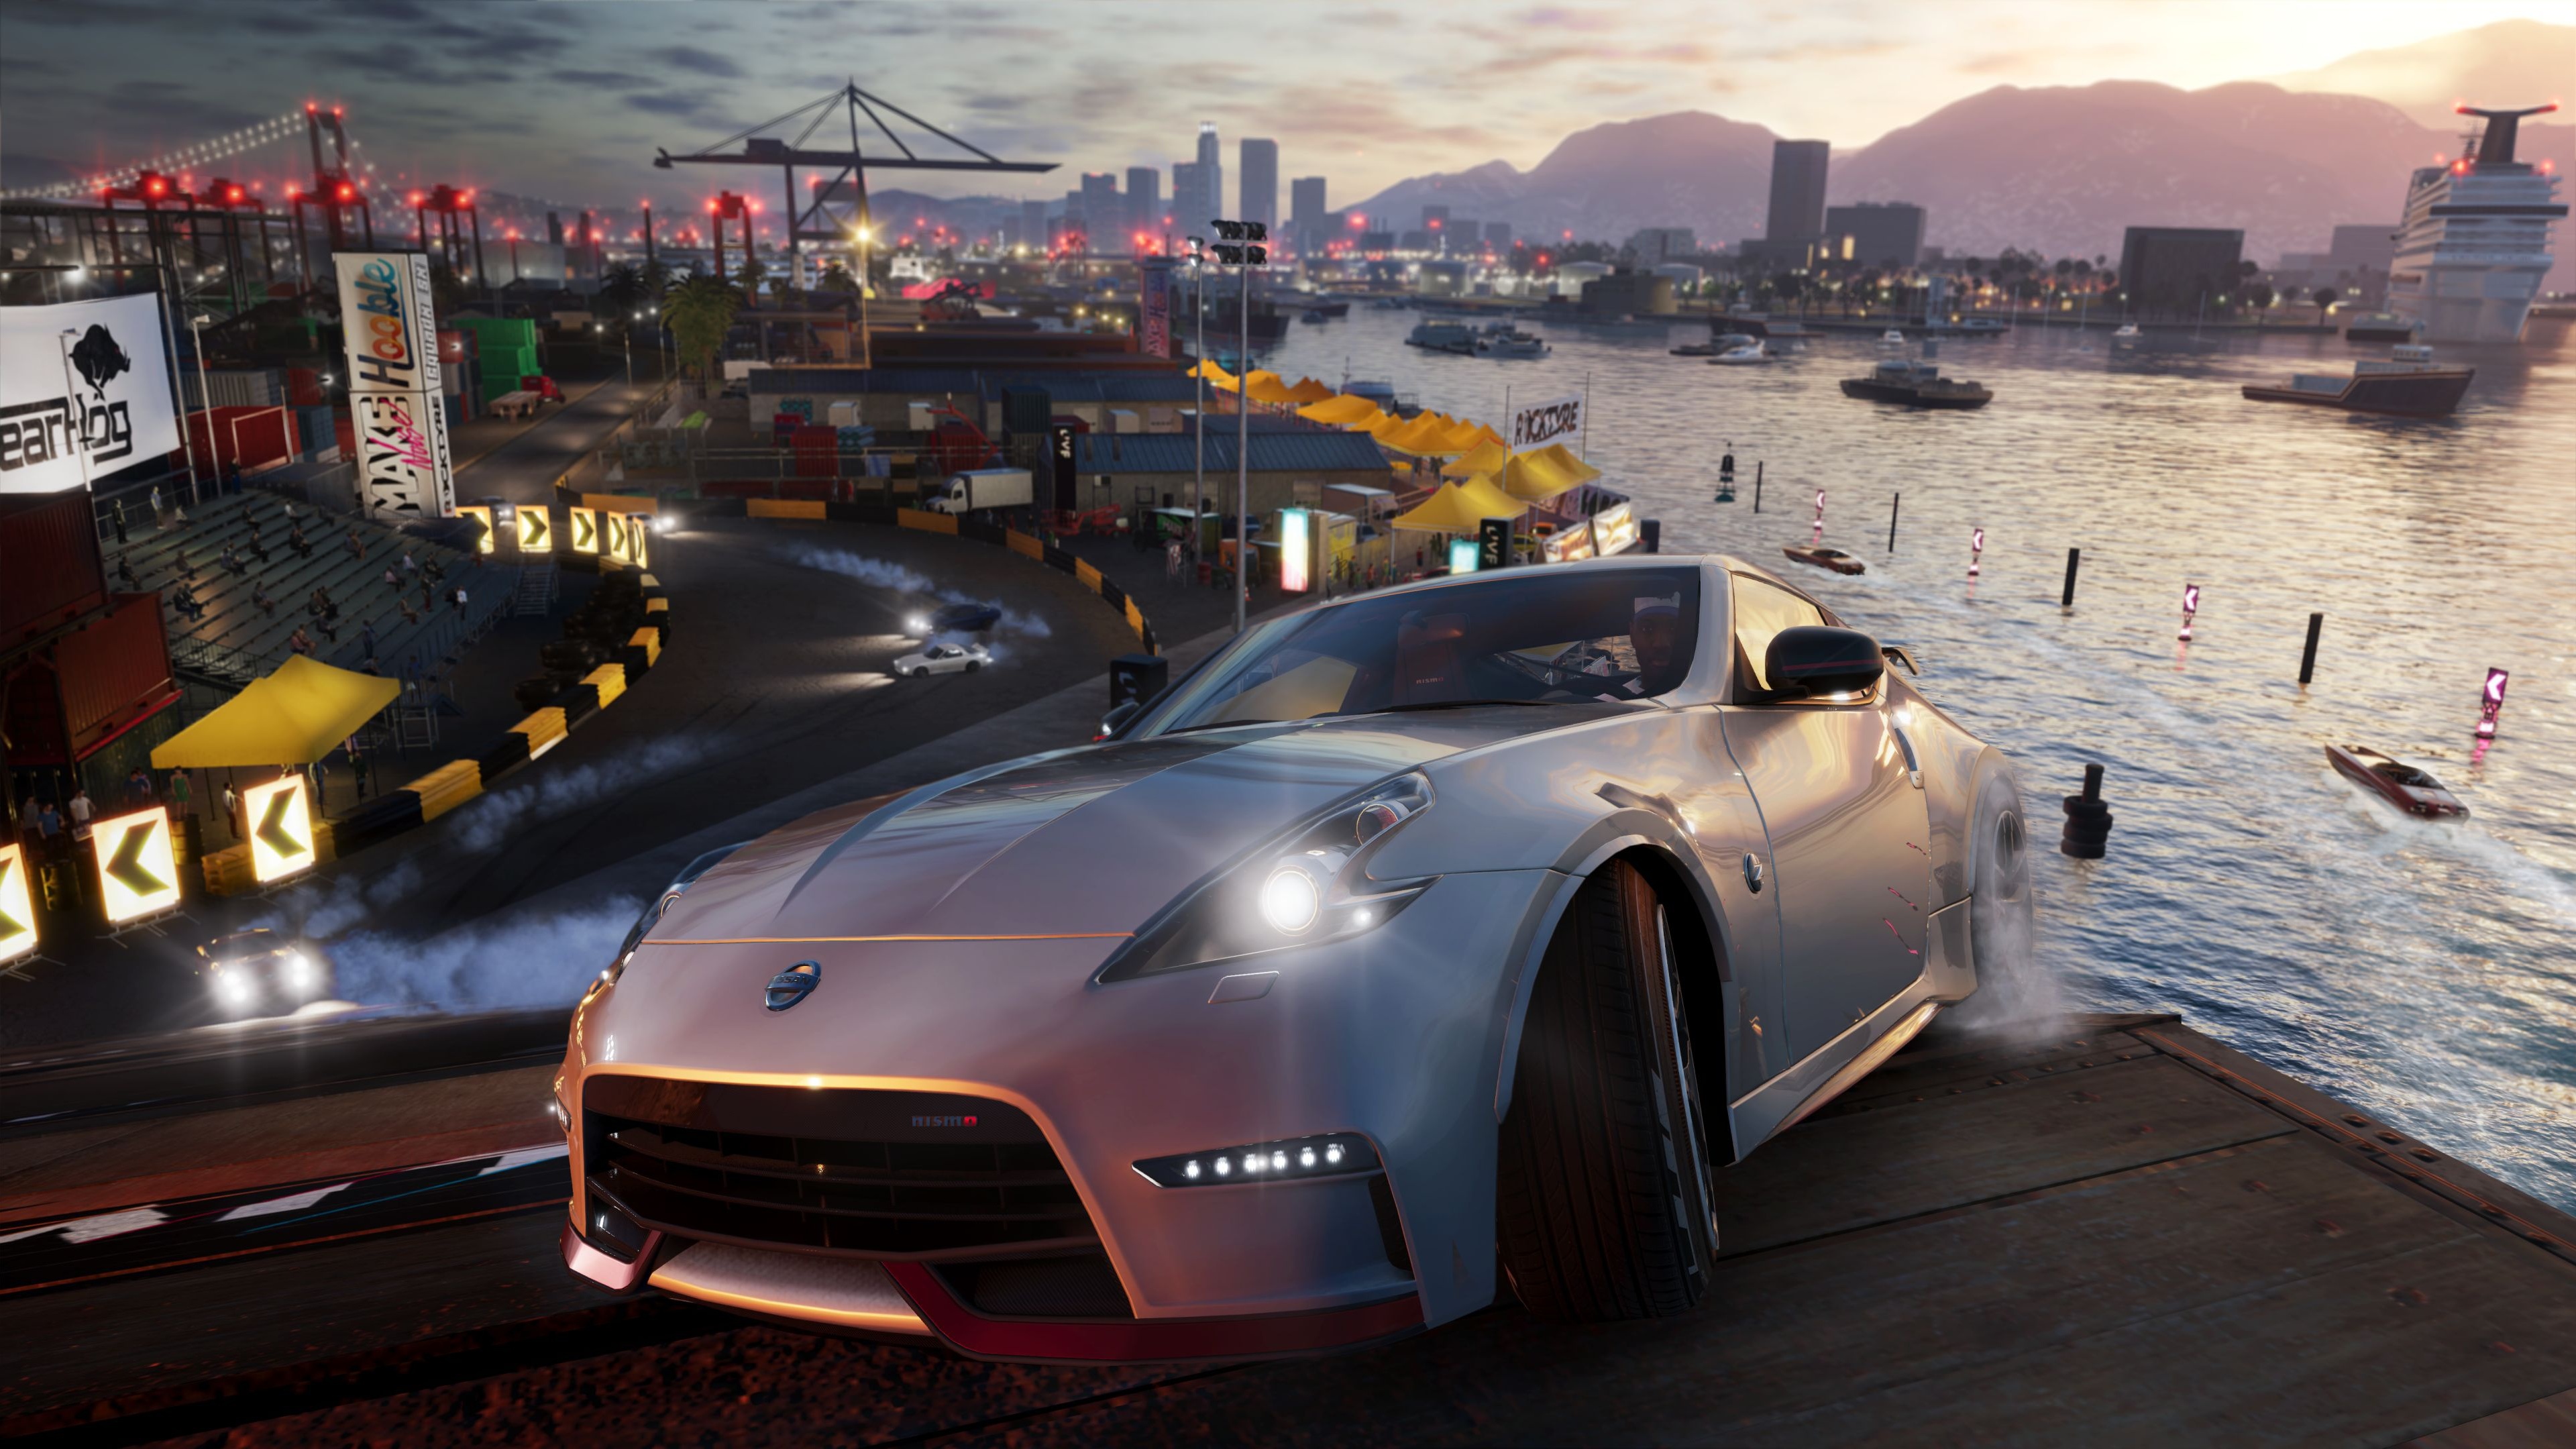 Image Nissan 370Z, The Crew 2 White Games Cars 3840x2160